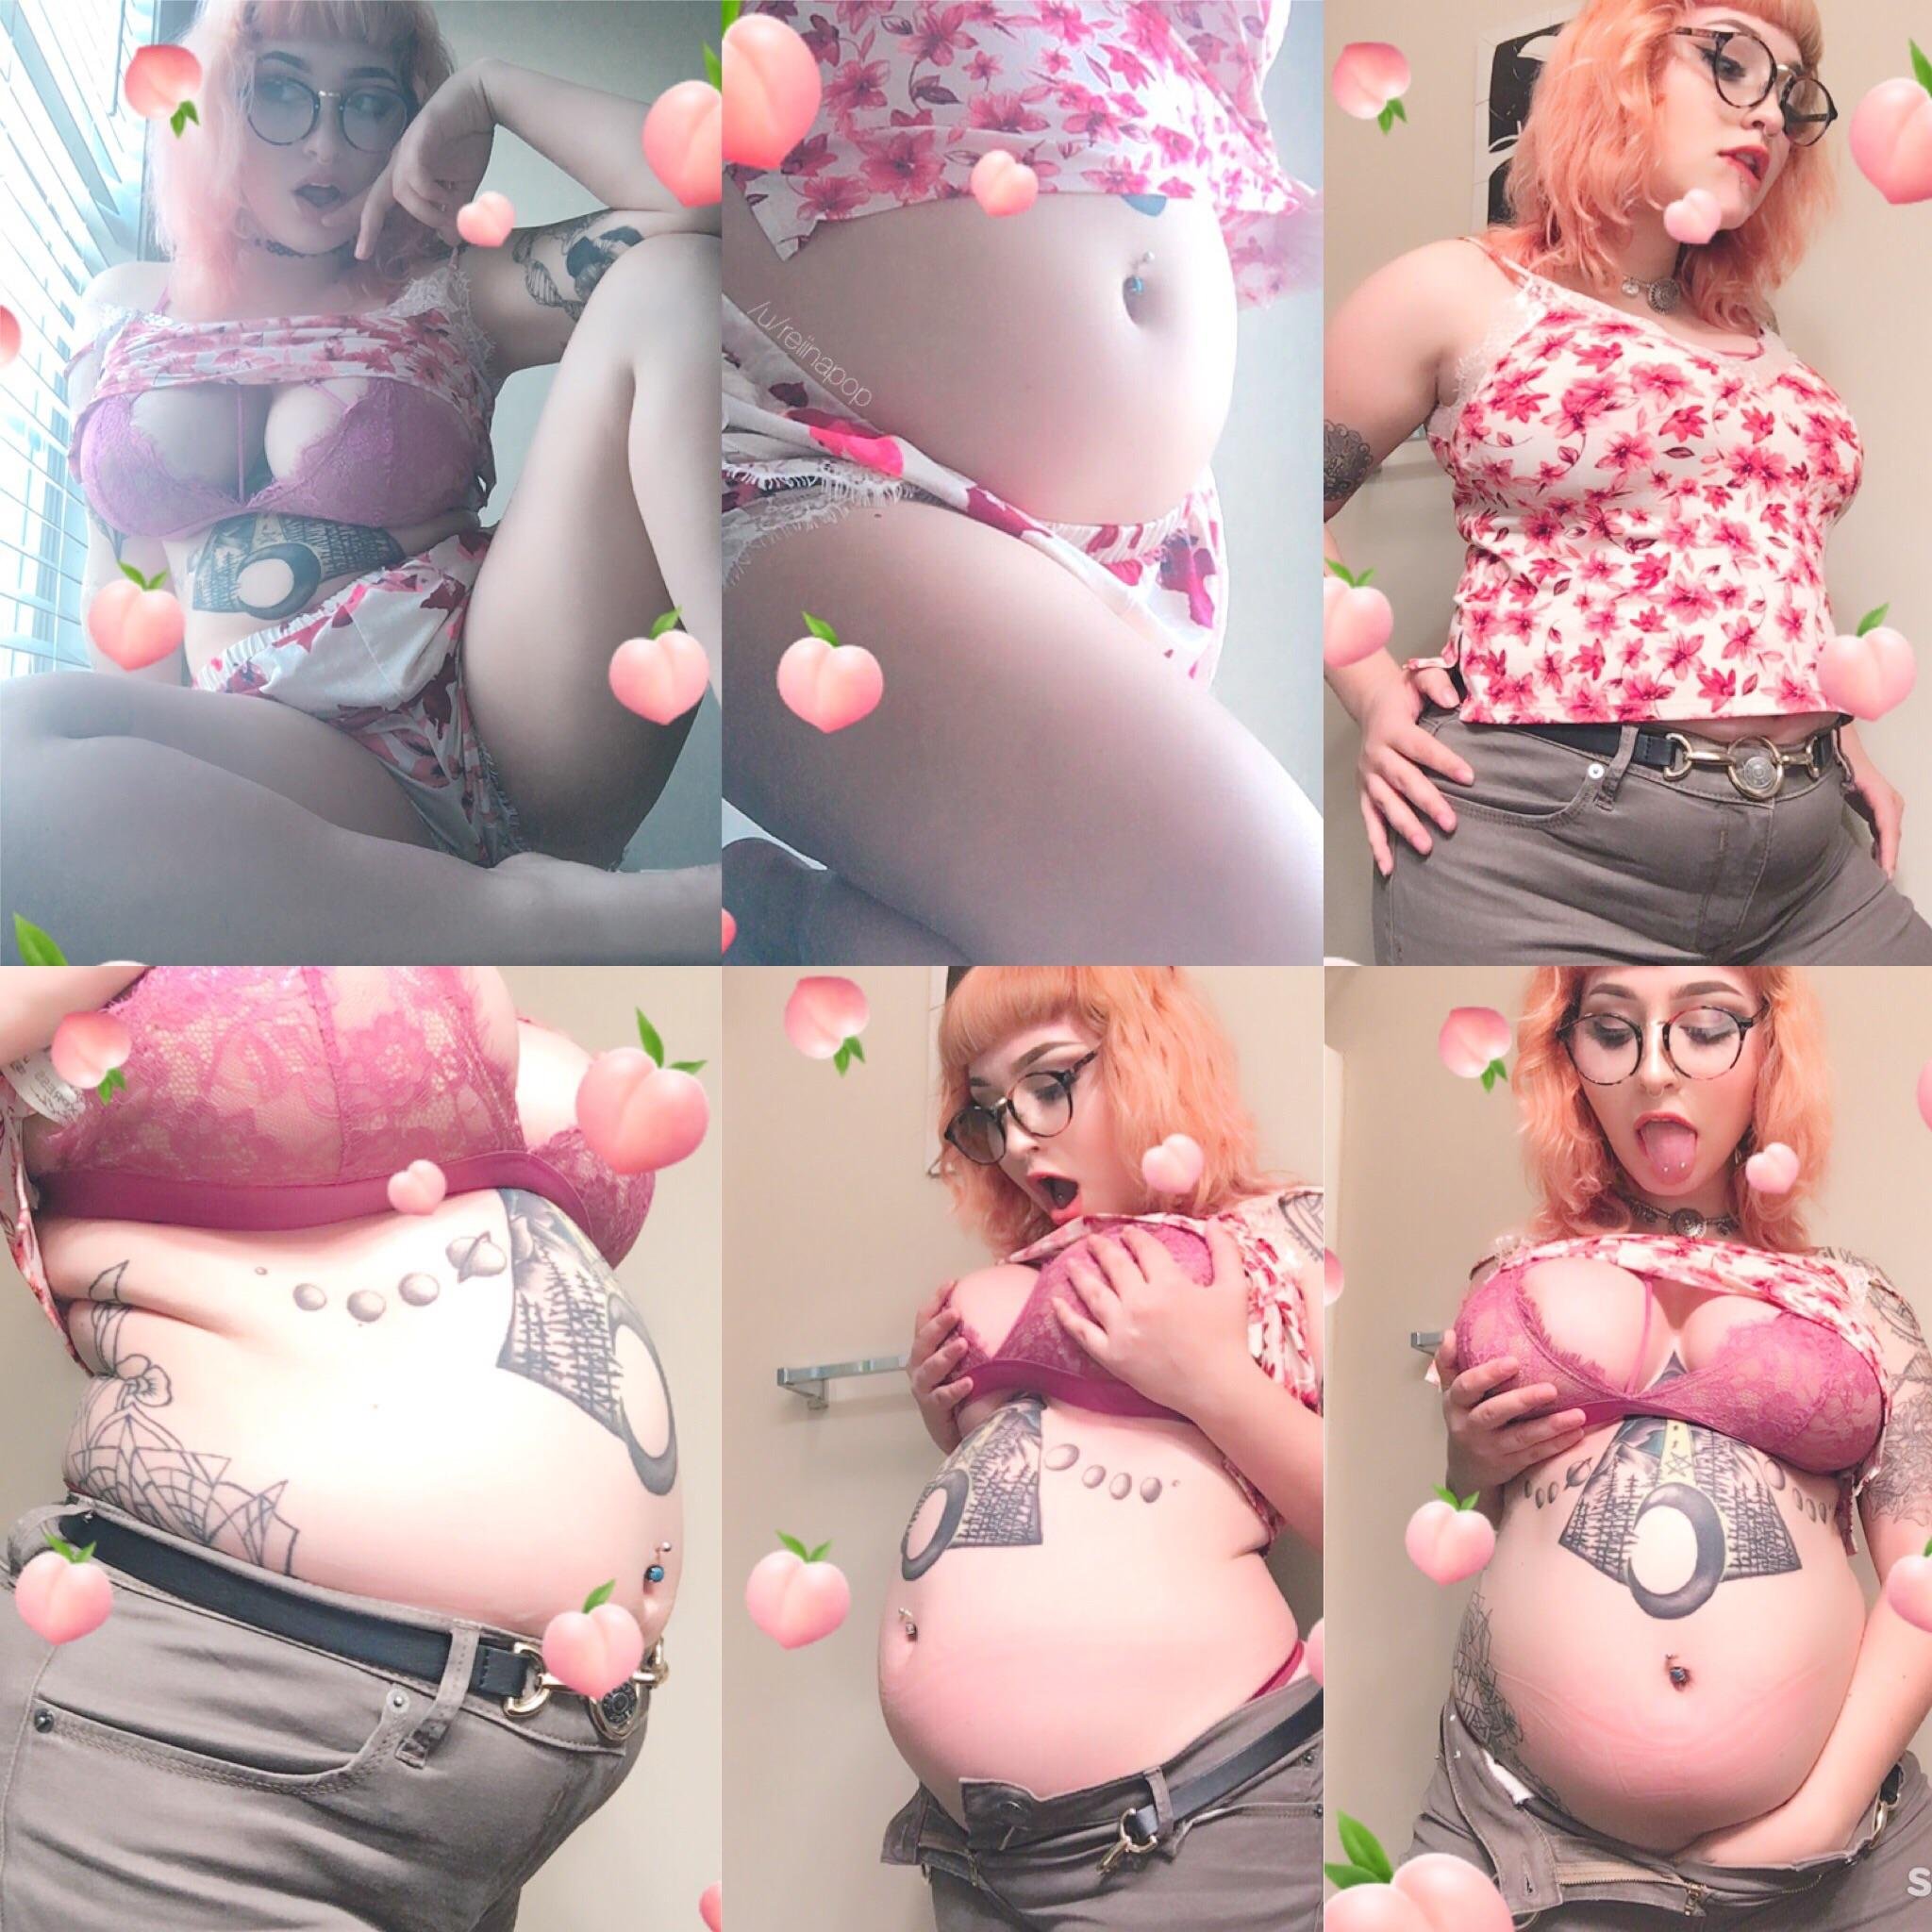 Before, during and after belly stuffing all day! food list in description~